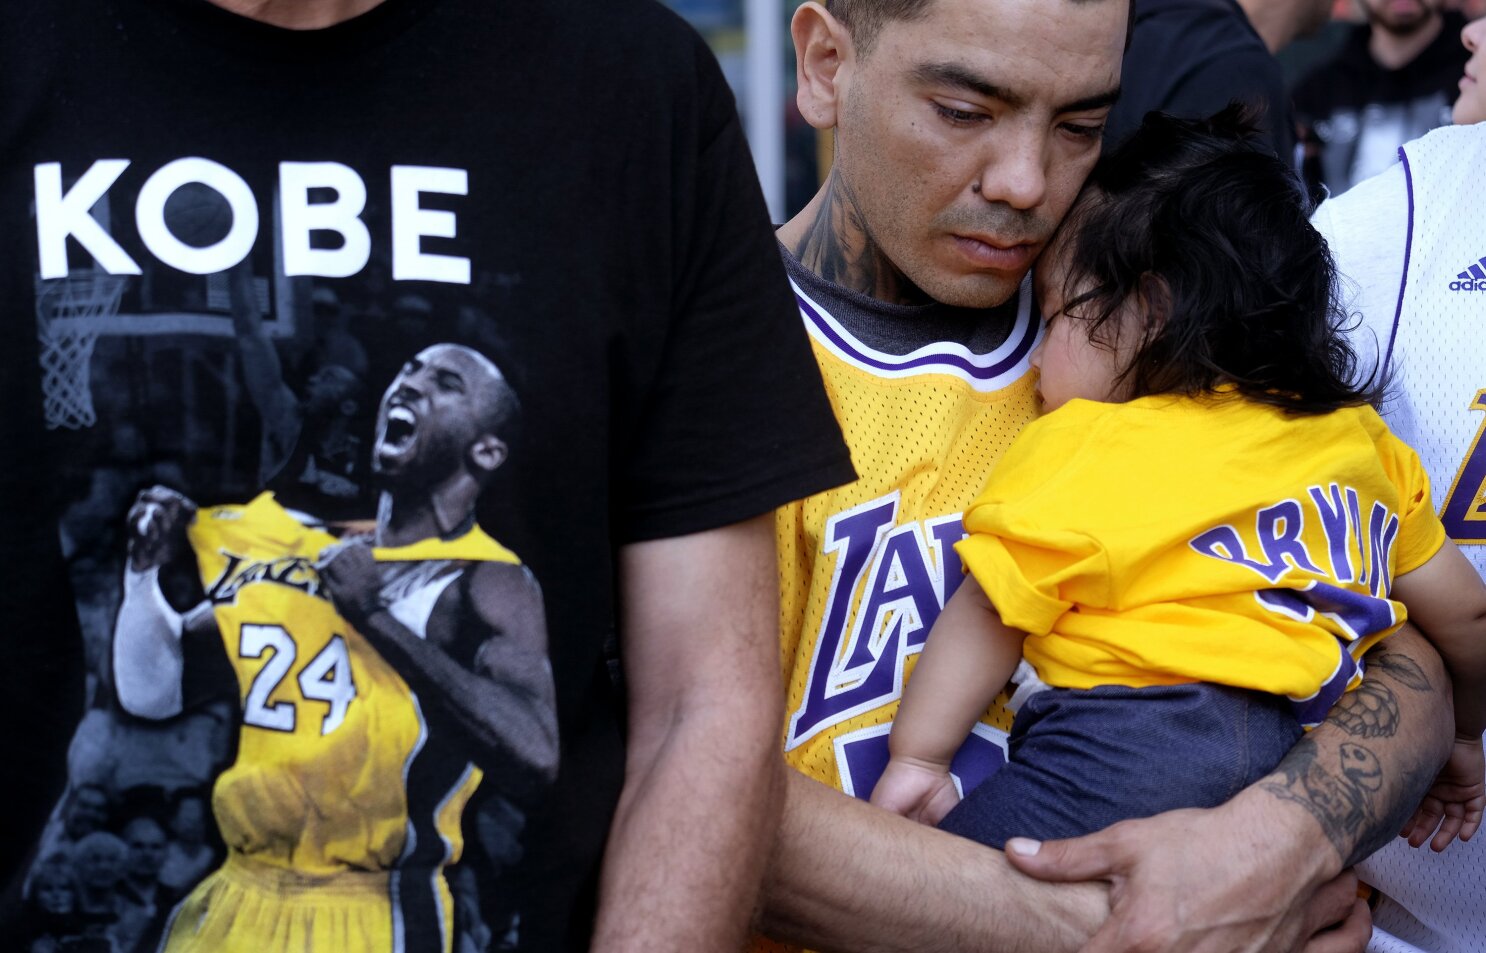 Memorial service for Kobe Bryant, daughter Gianna, other crash victims set  for Feb. 24